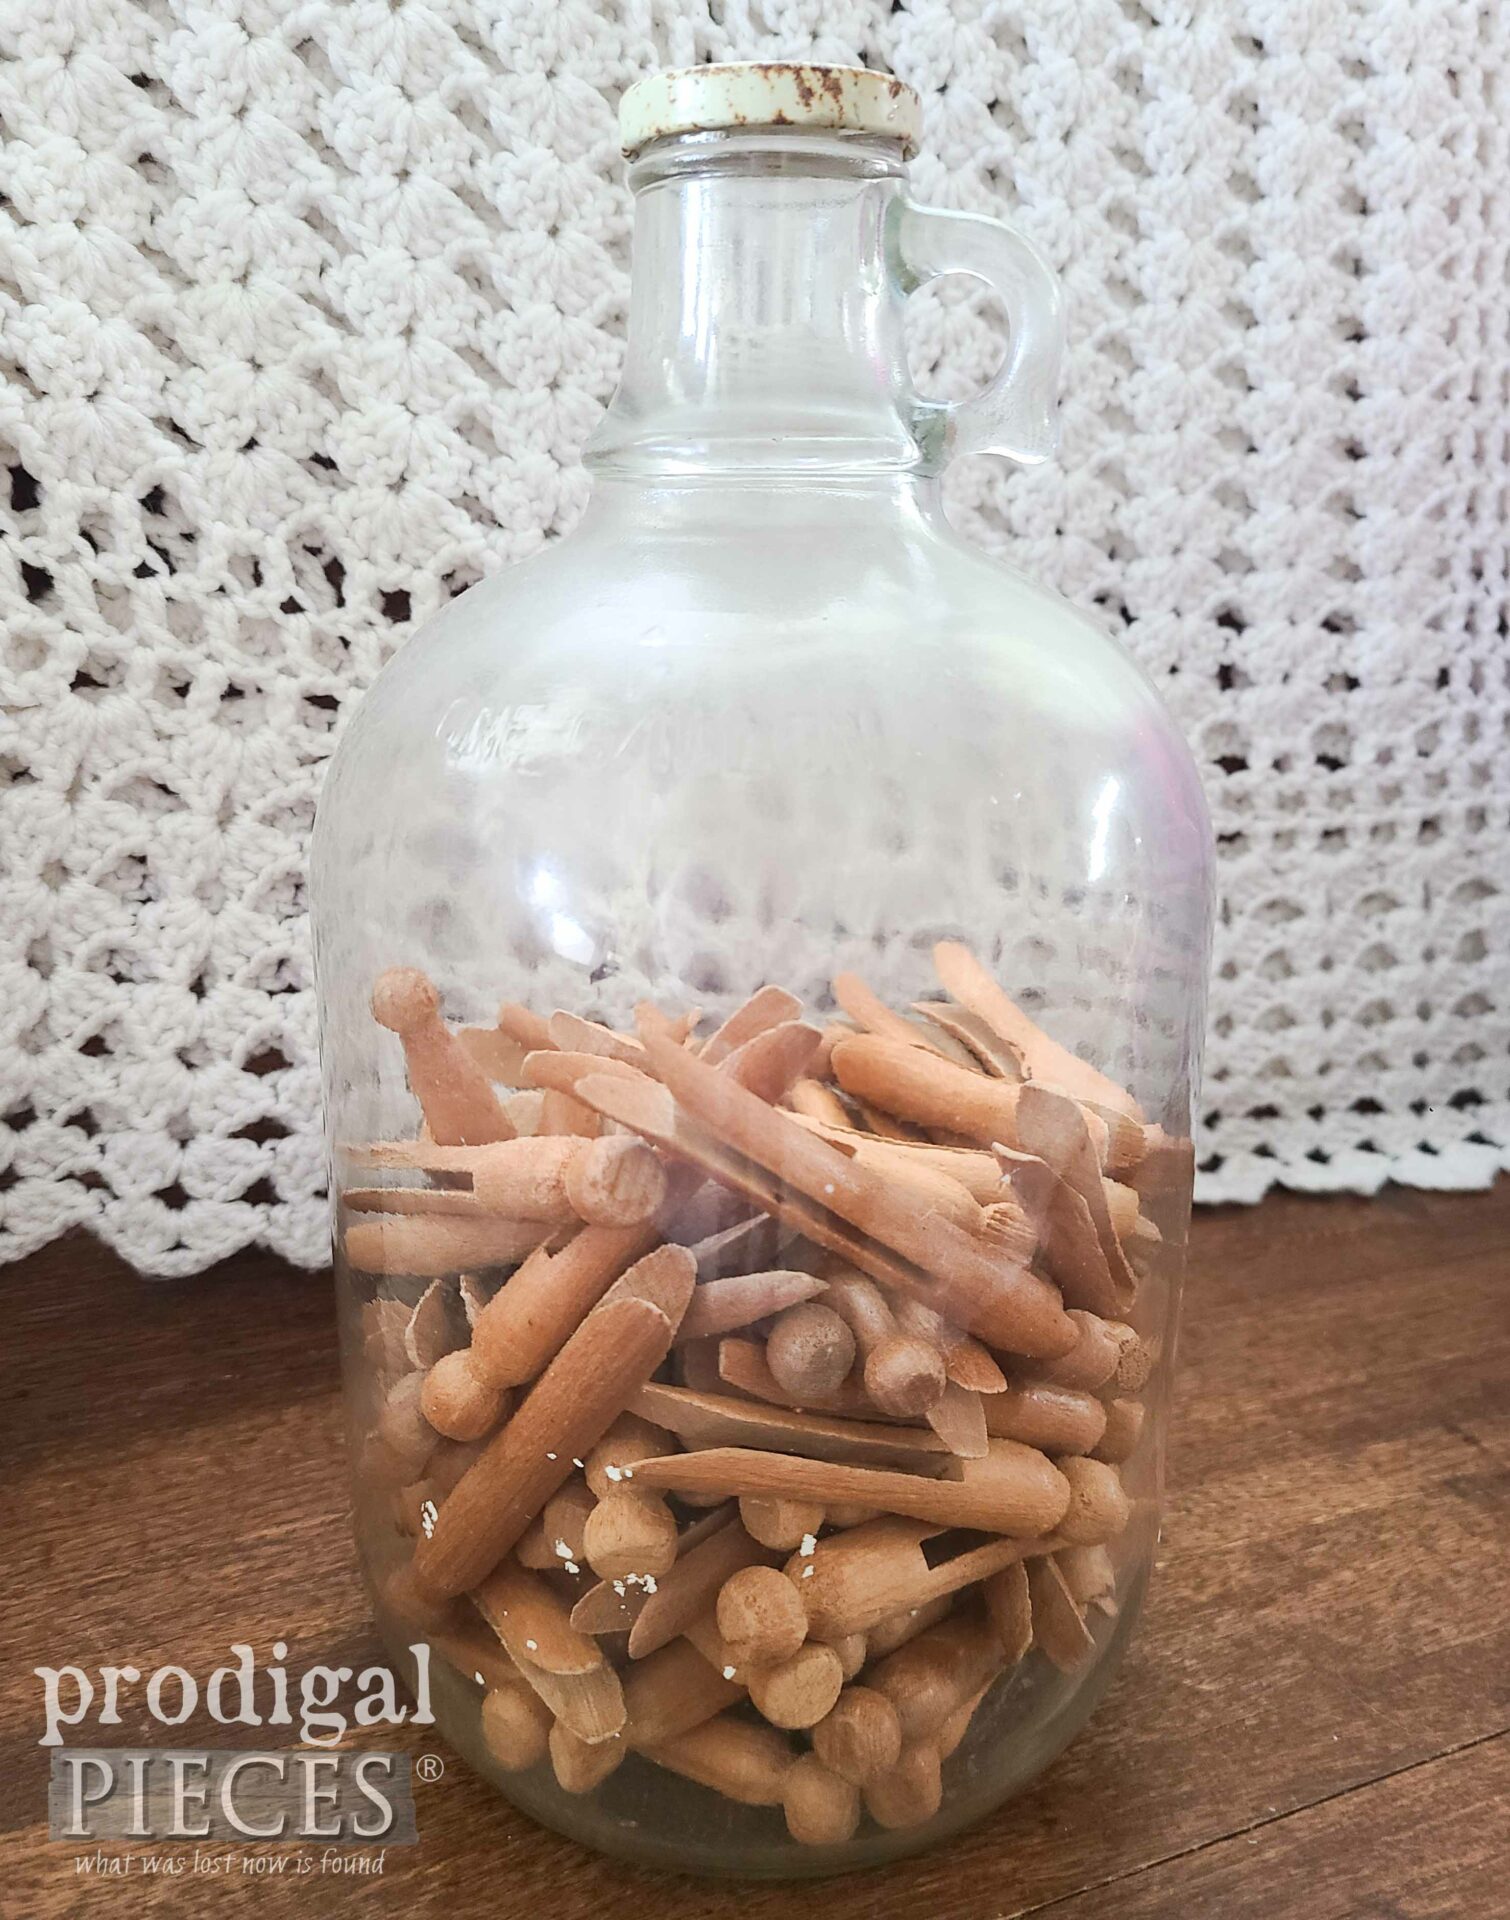 Whiskey Jug of Antique Clothespins for Refashioning | prodigalpieces.com #prodigalpieces